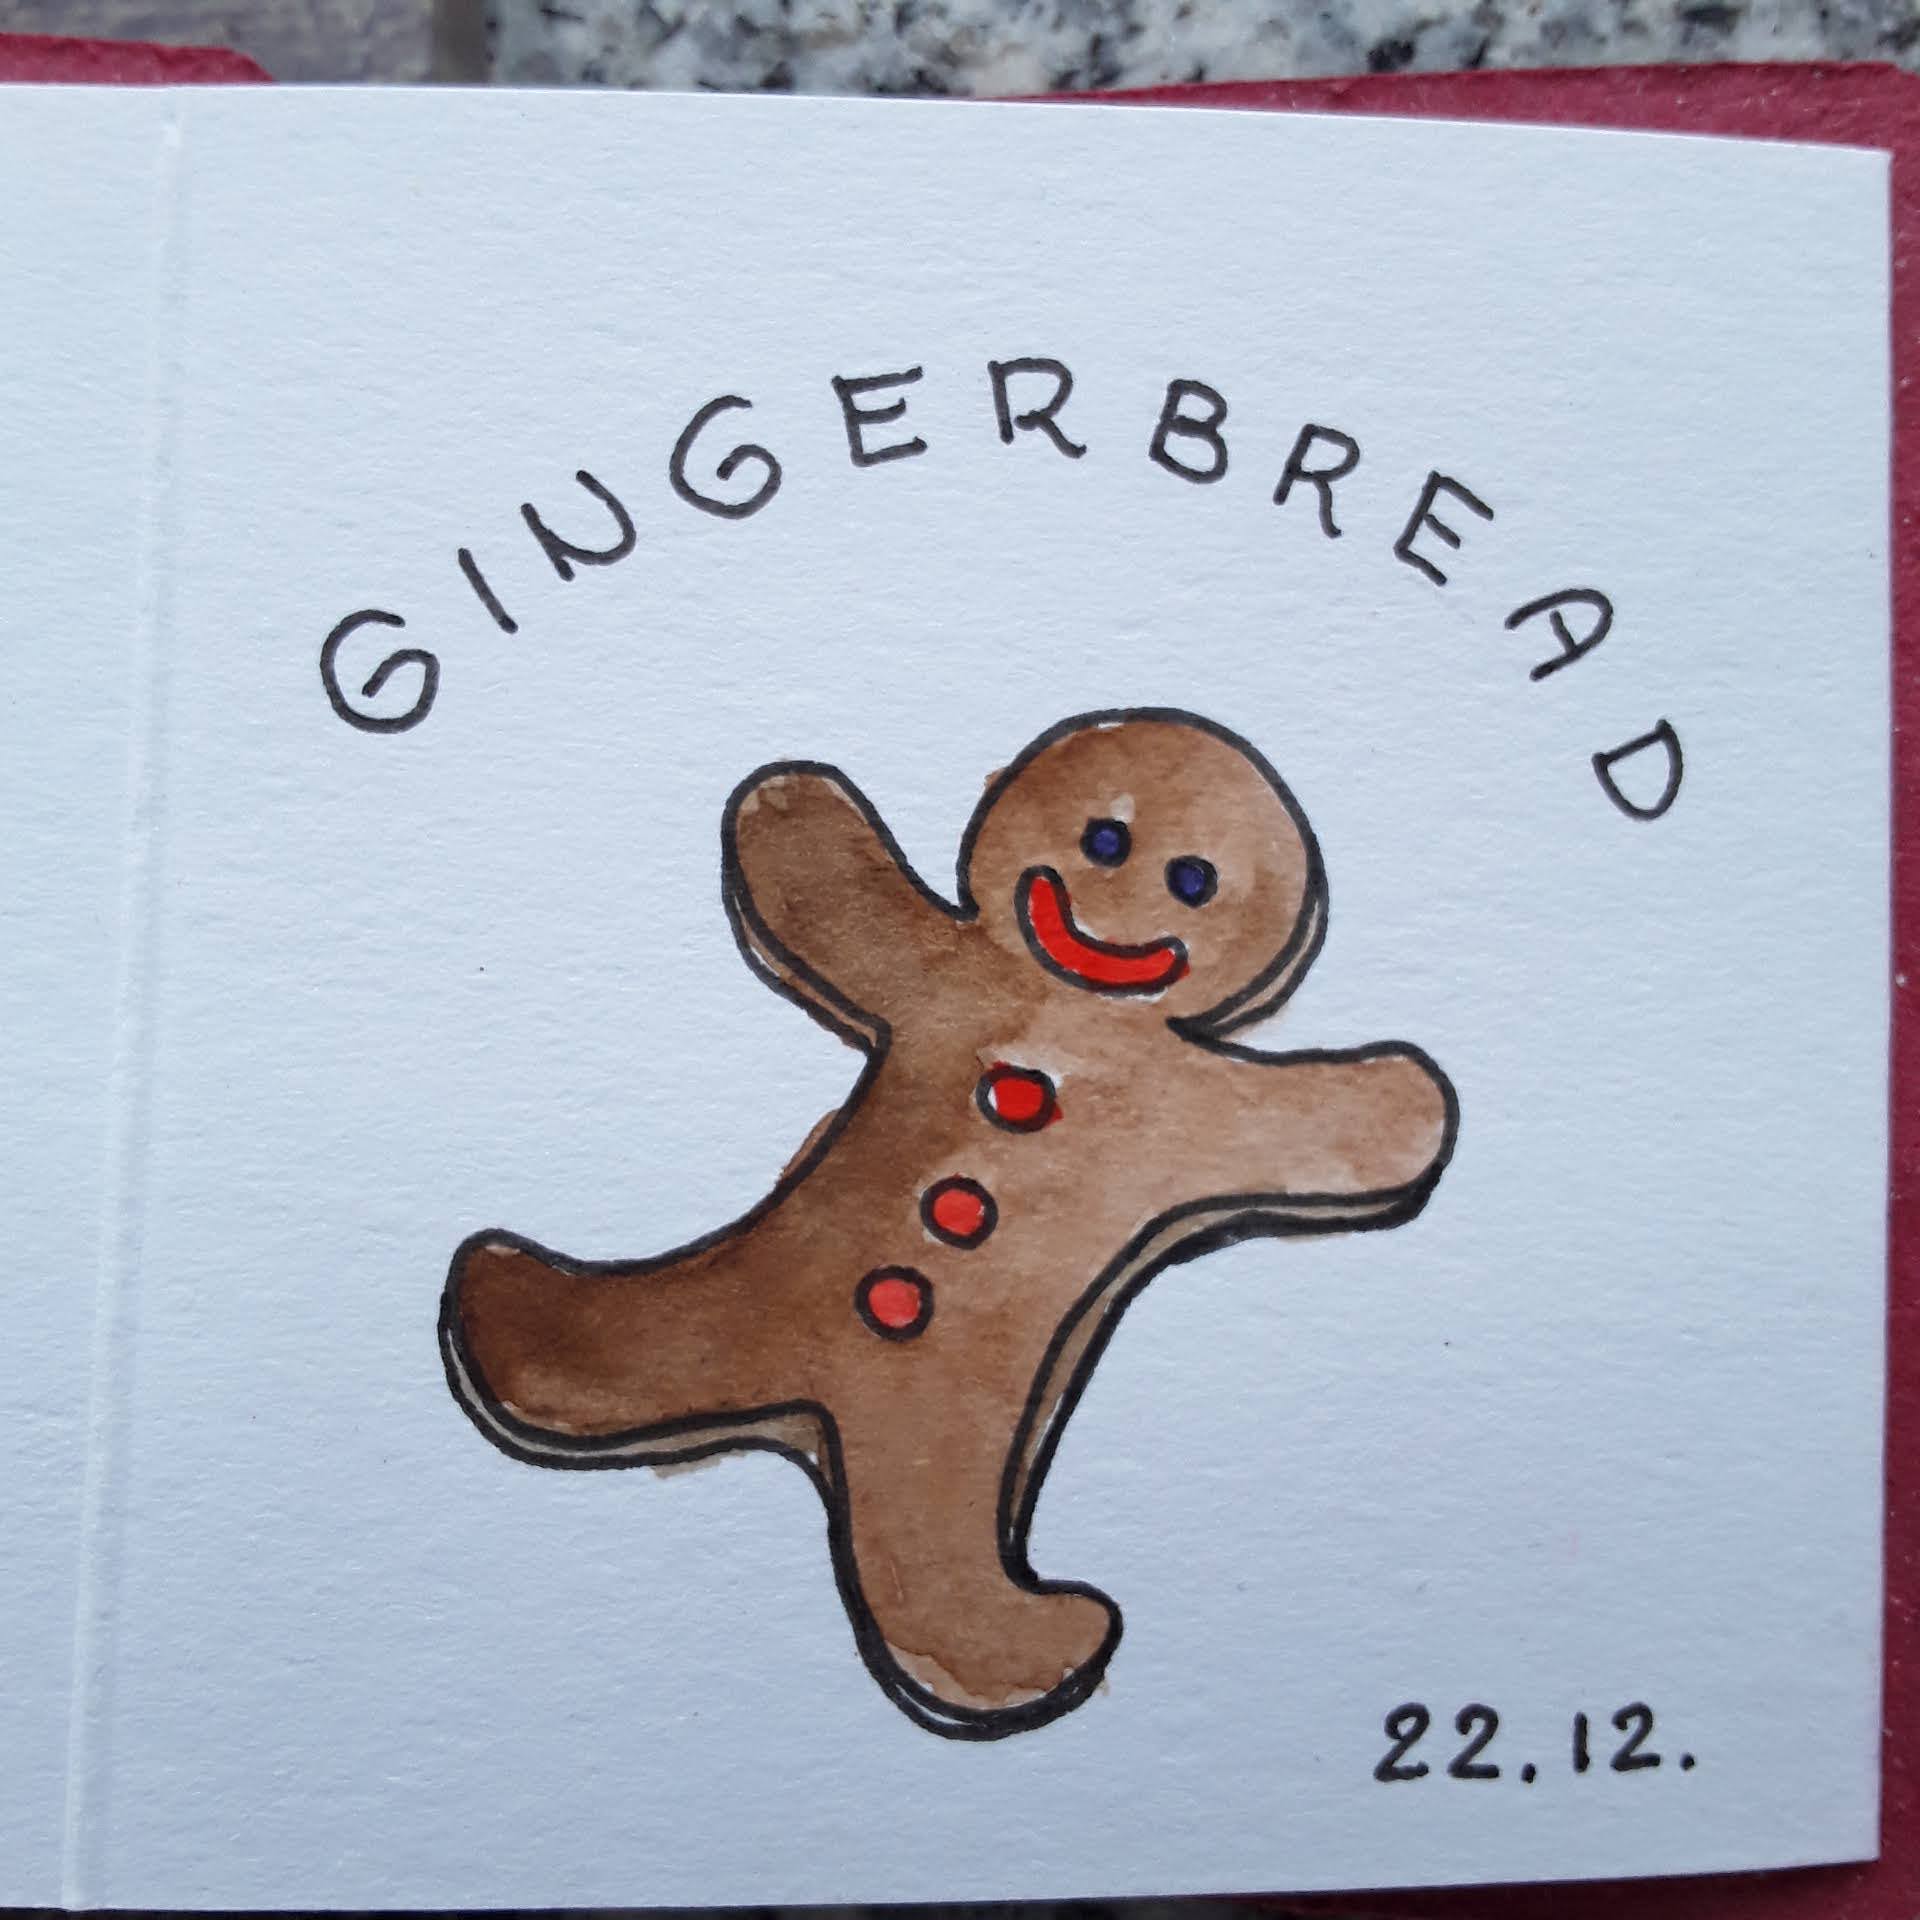 Gingerbread is one of the most known Christmas cookies...